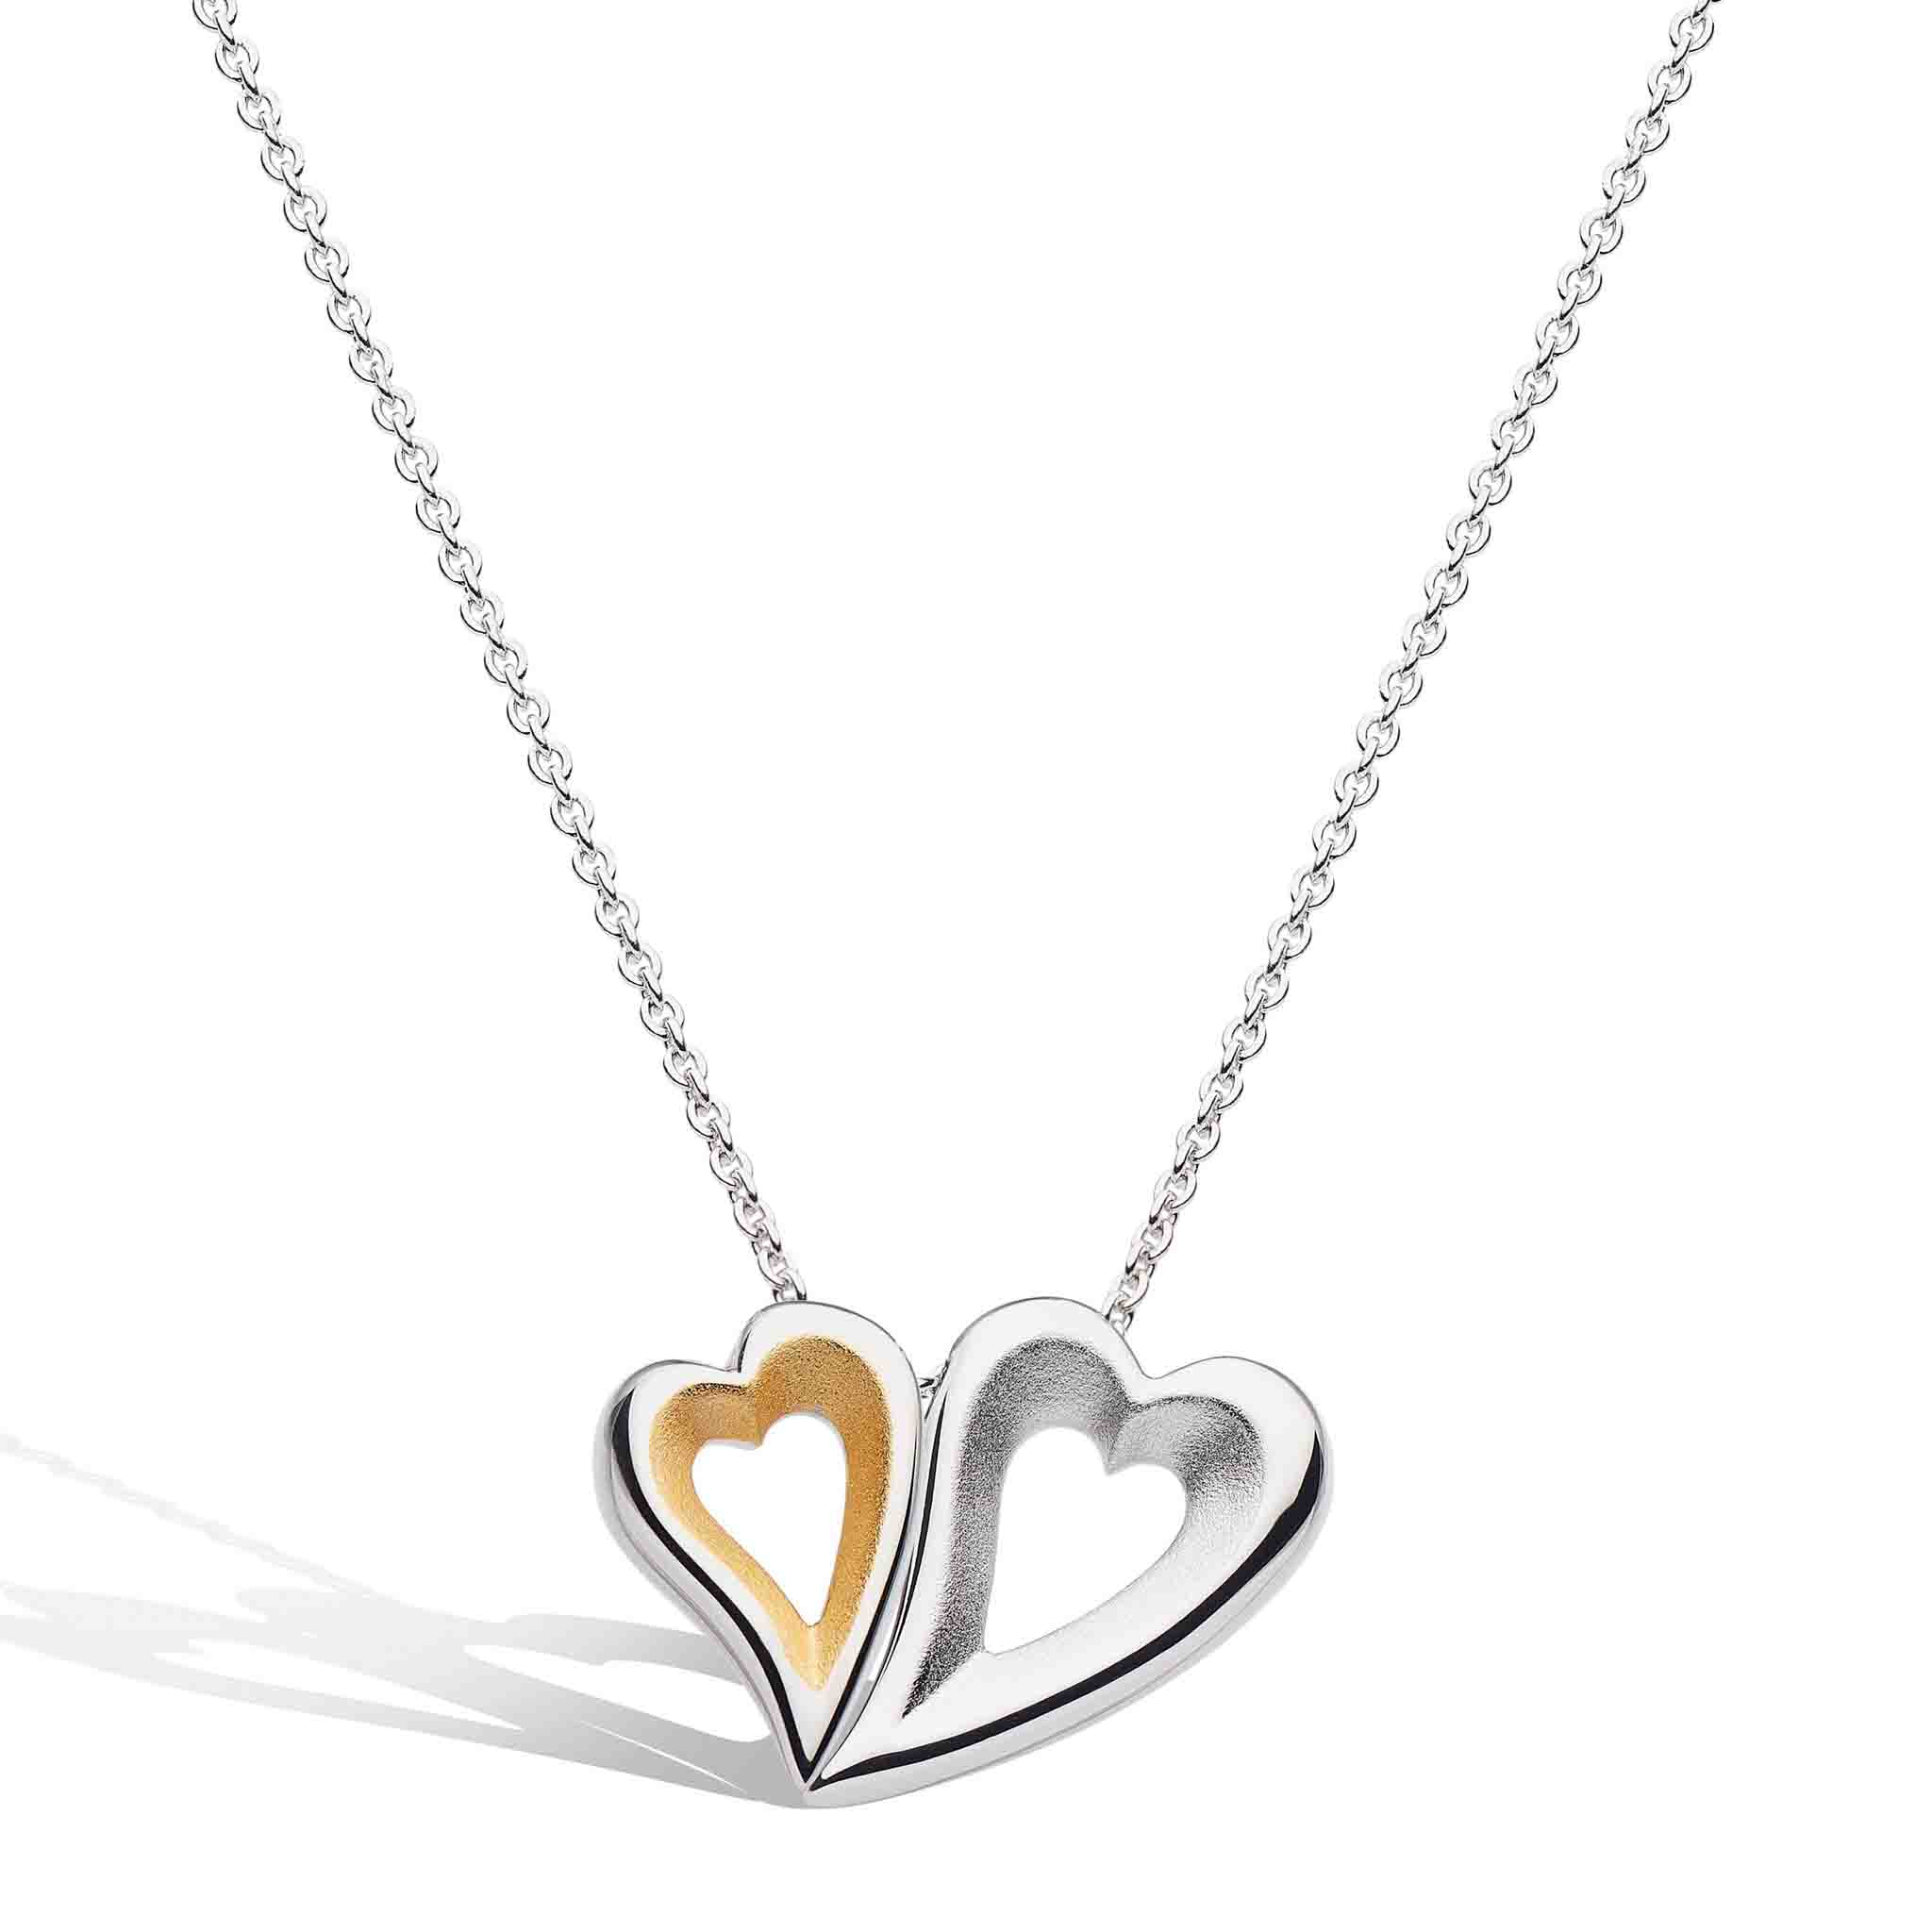 Desire Love Story Gold RP/GP SB Tender Together Heart 18" Necklace